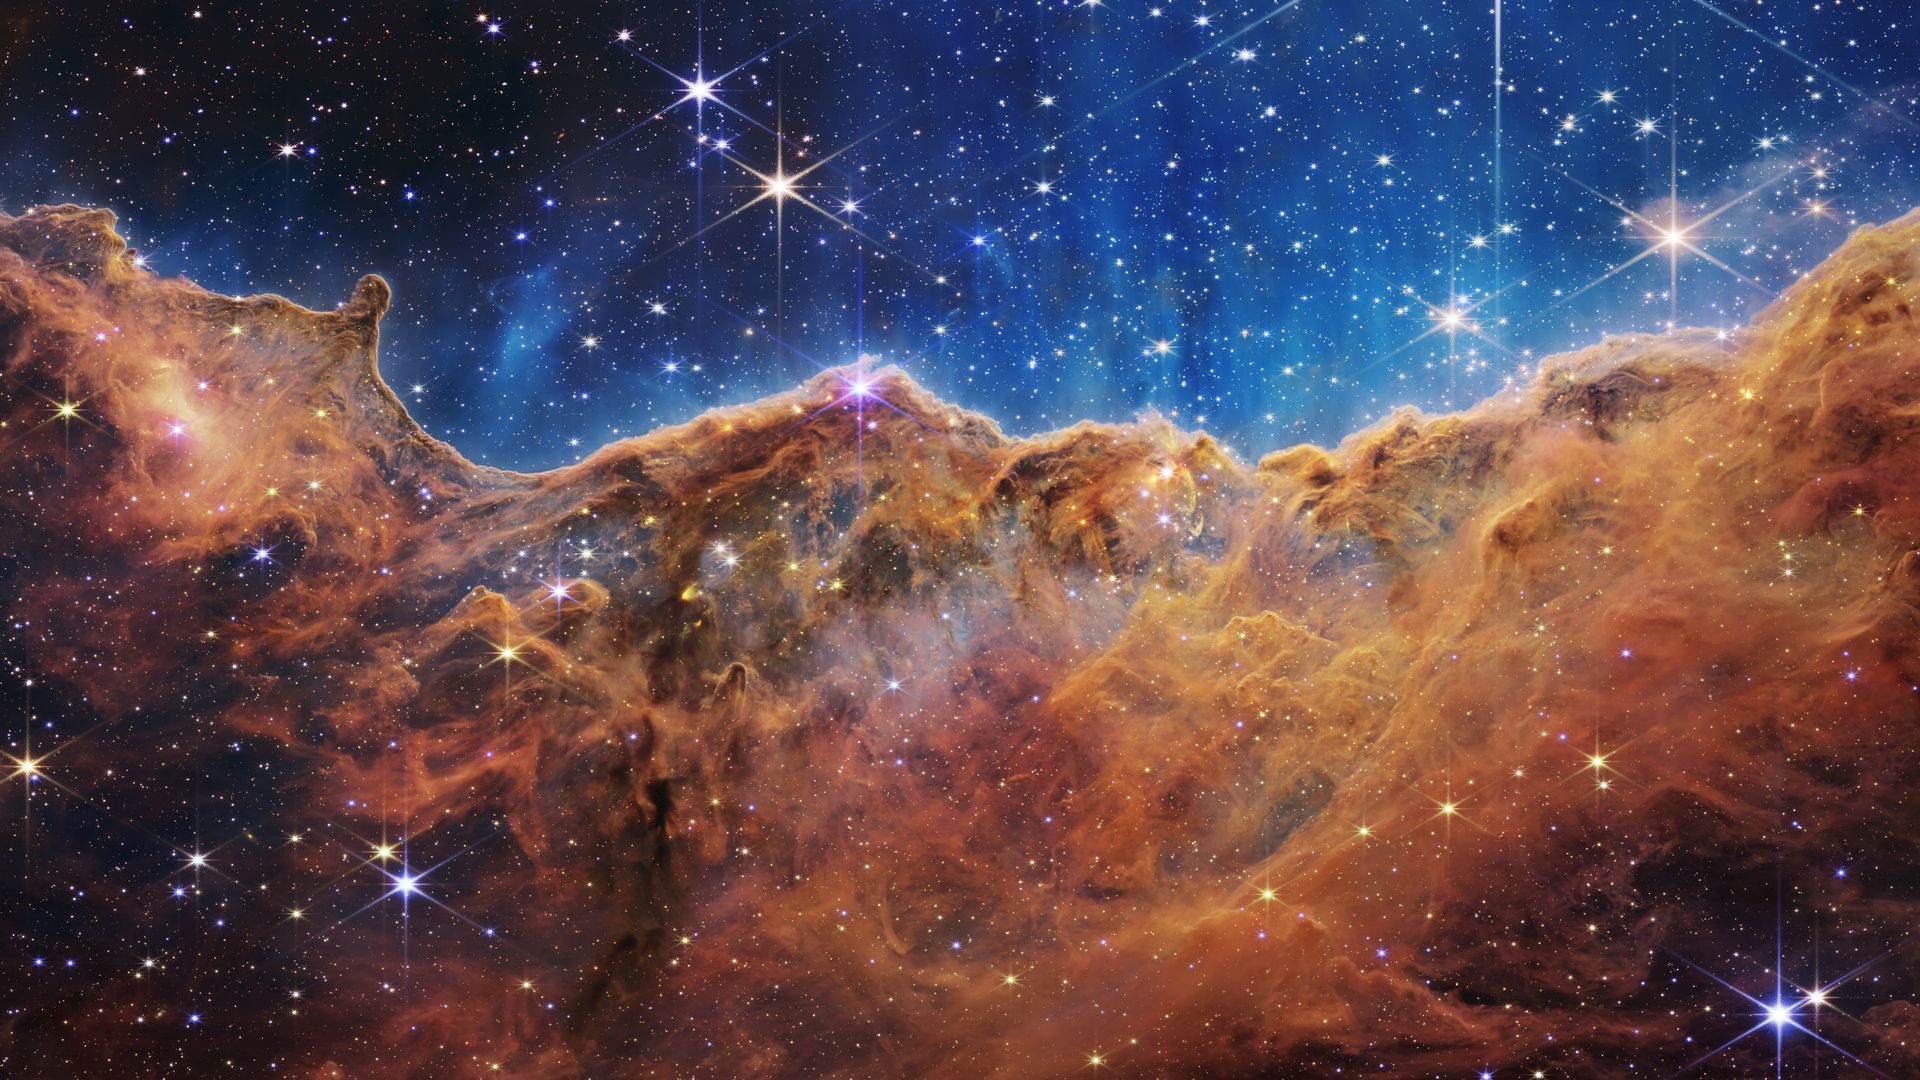 The edge of a young, star-forming region called NGC 3324 as seen by the James Webb Space Telescope.